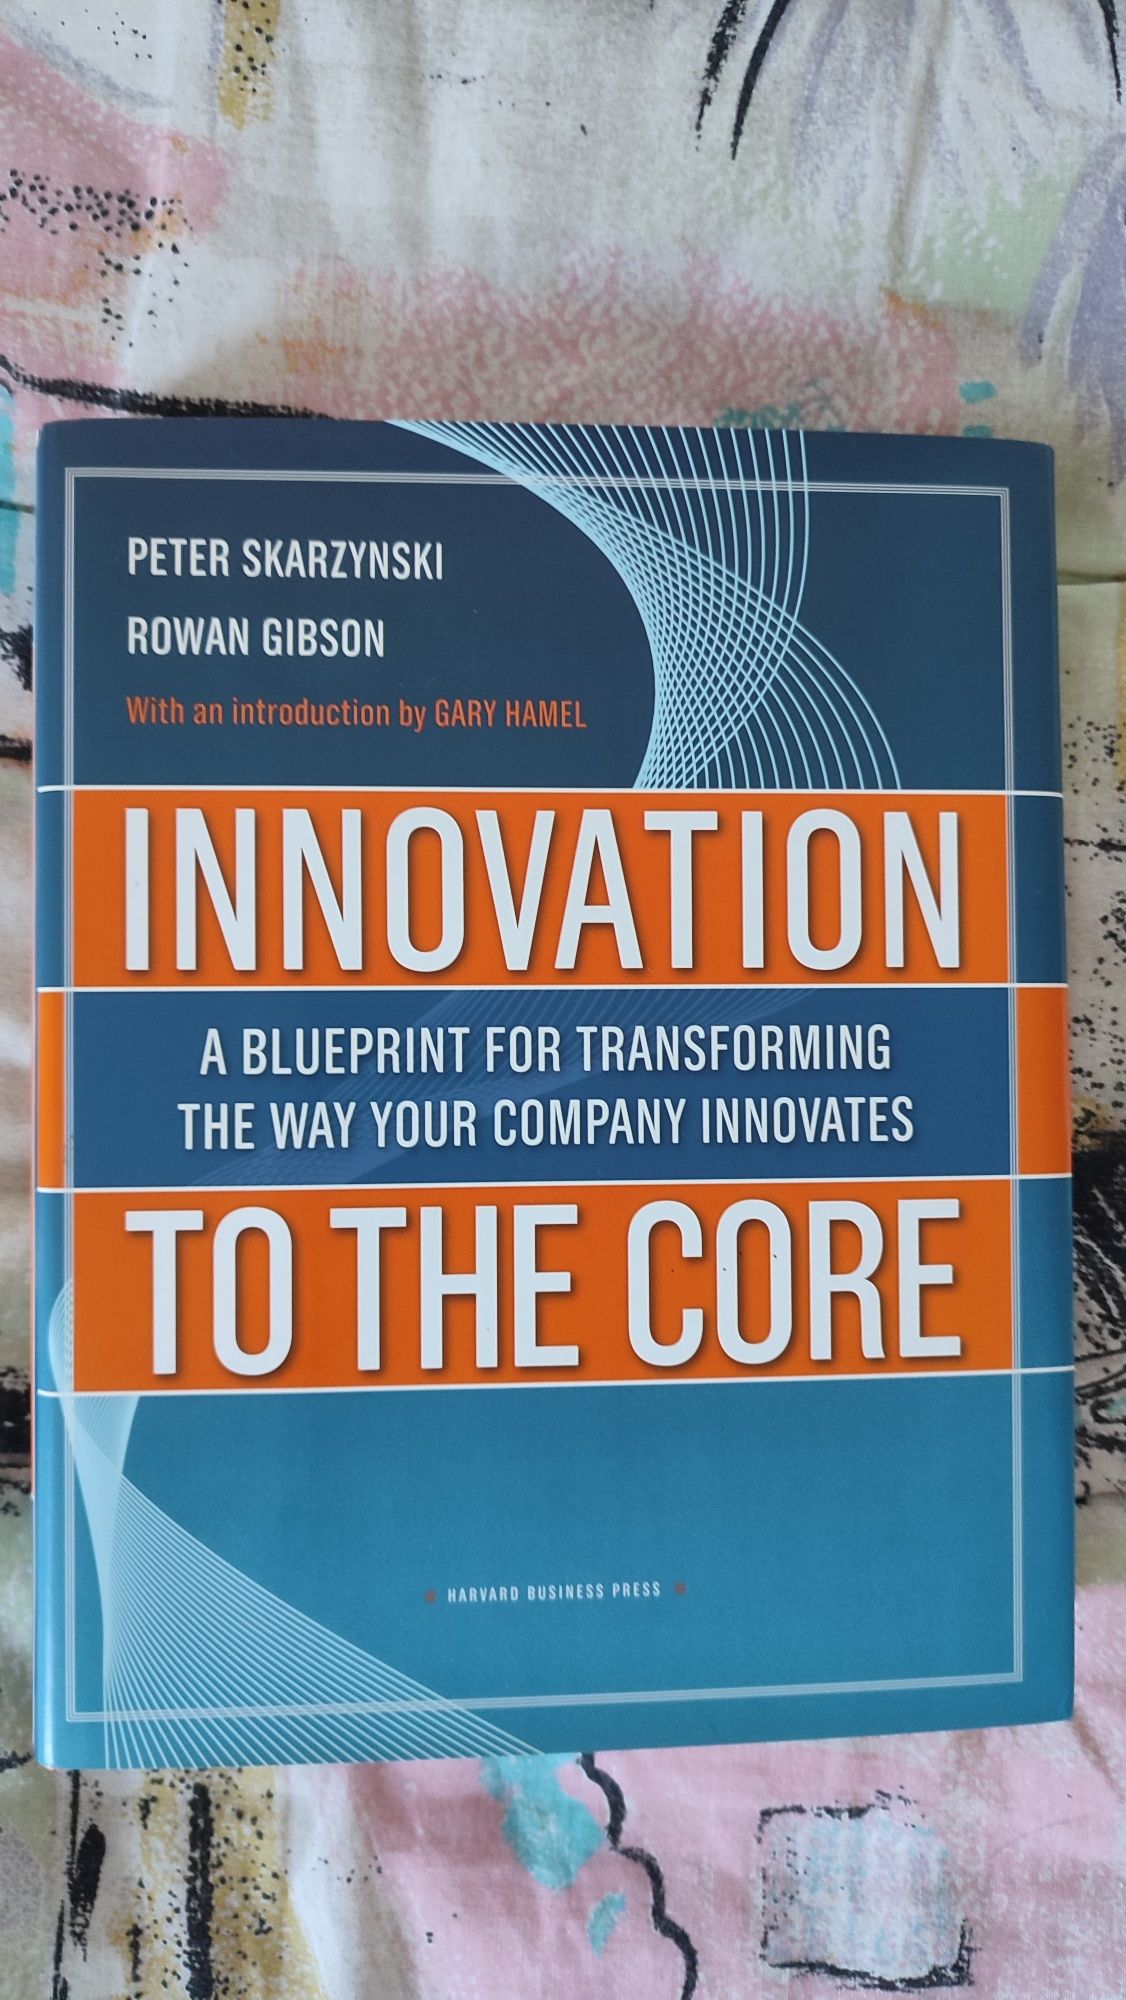 Innovation to the core